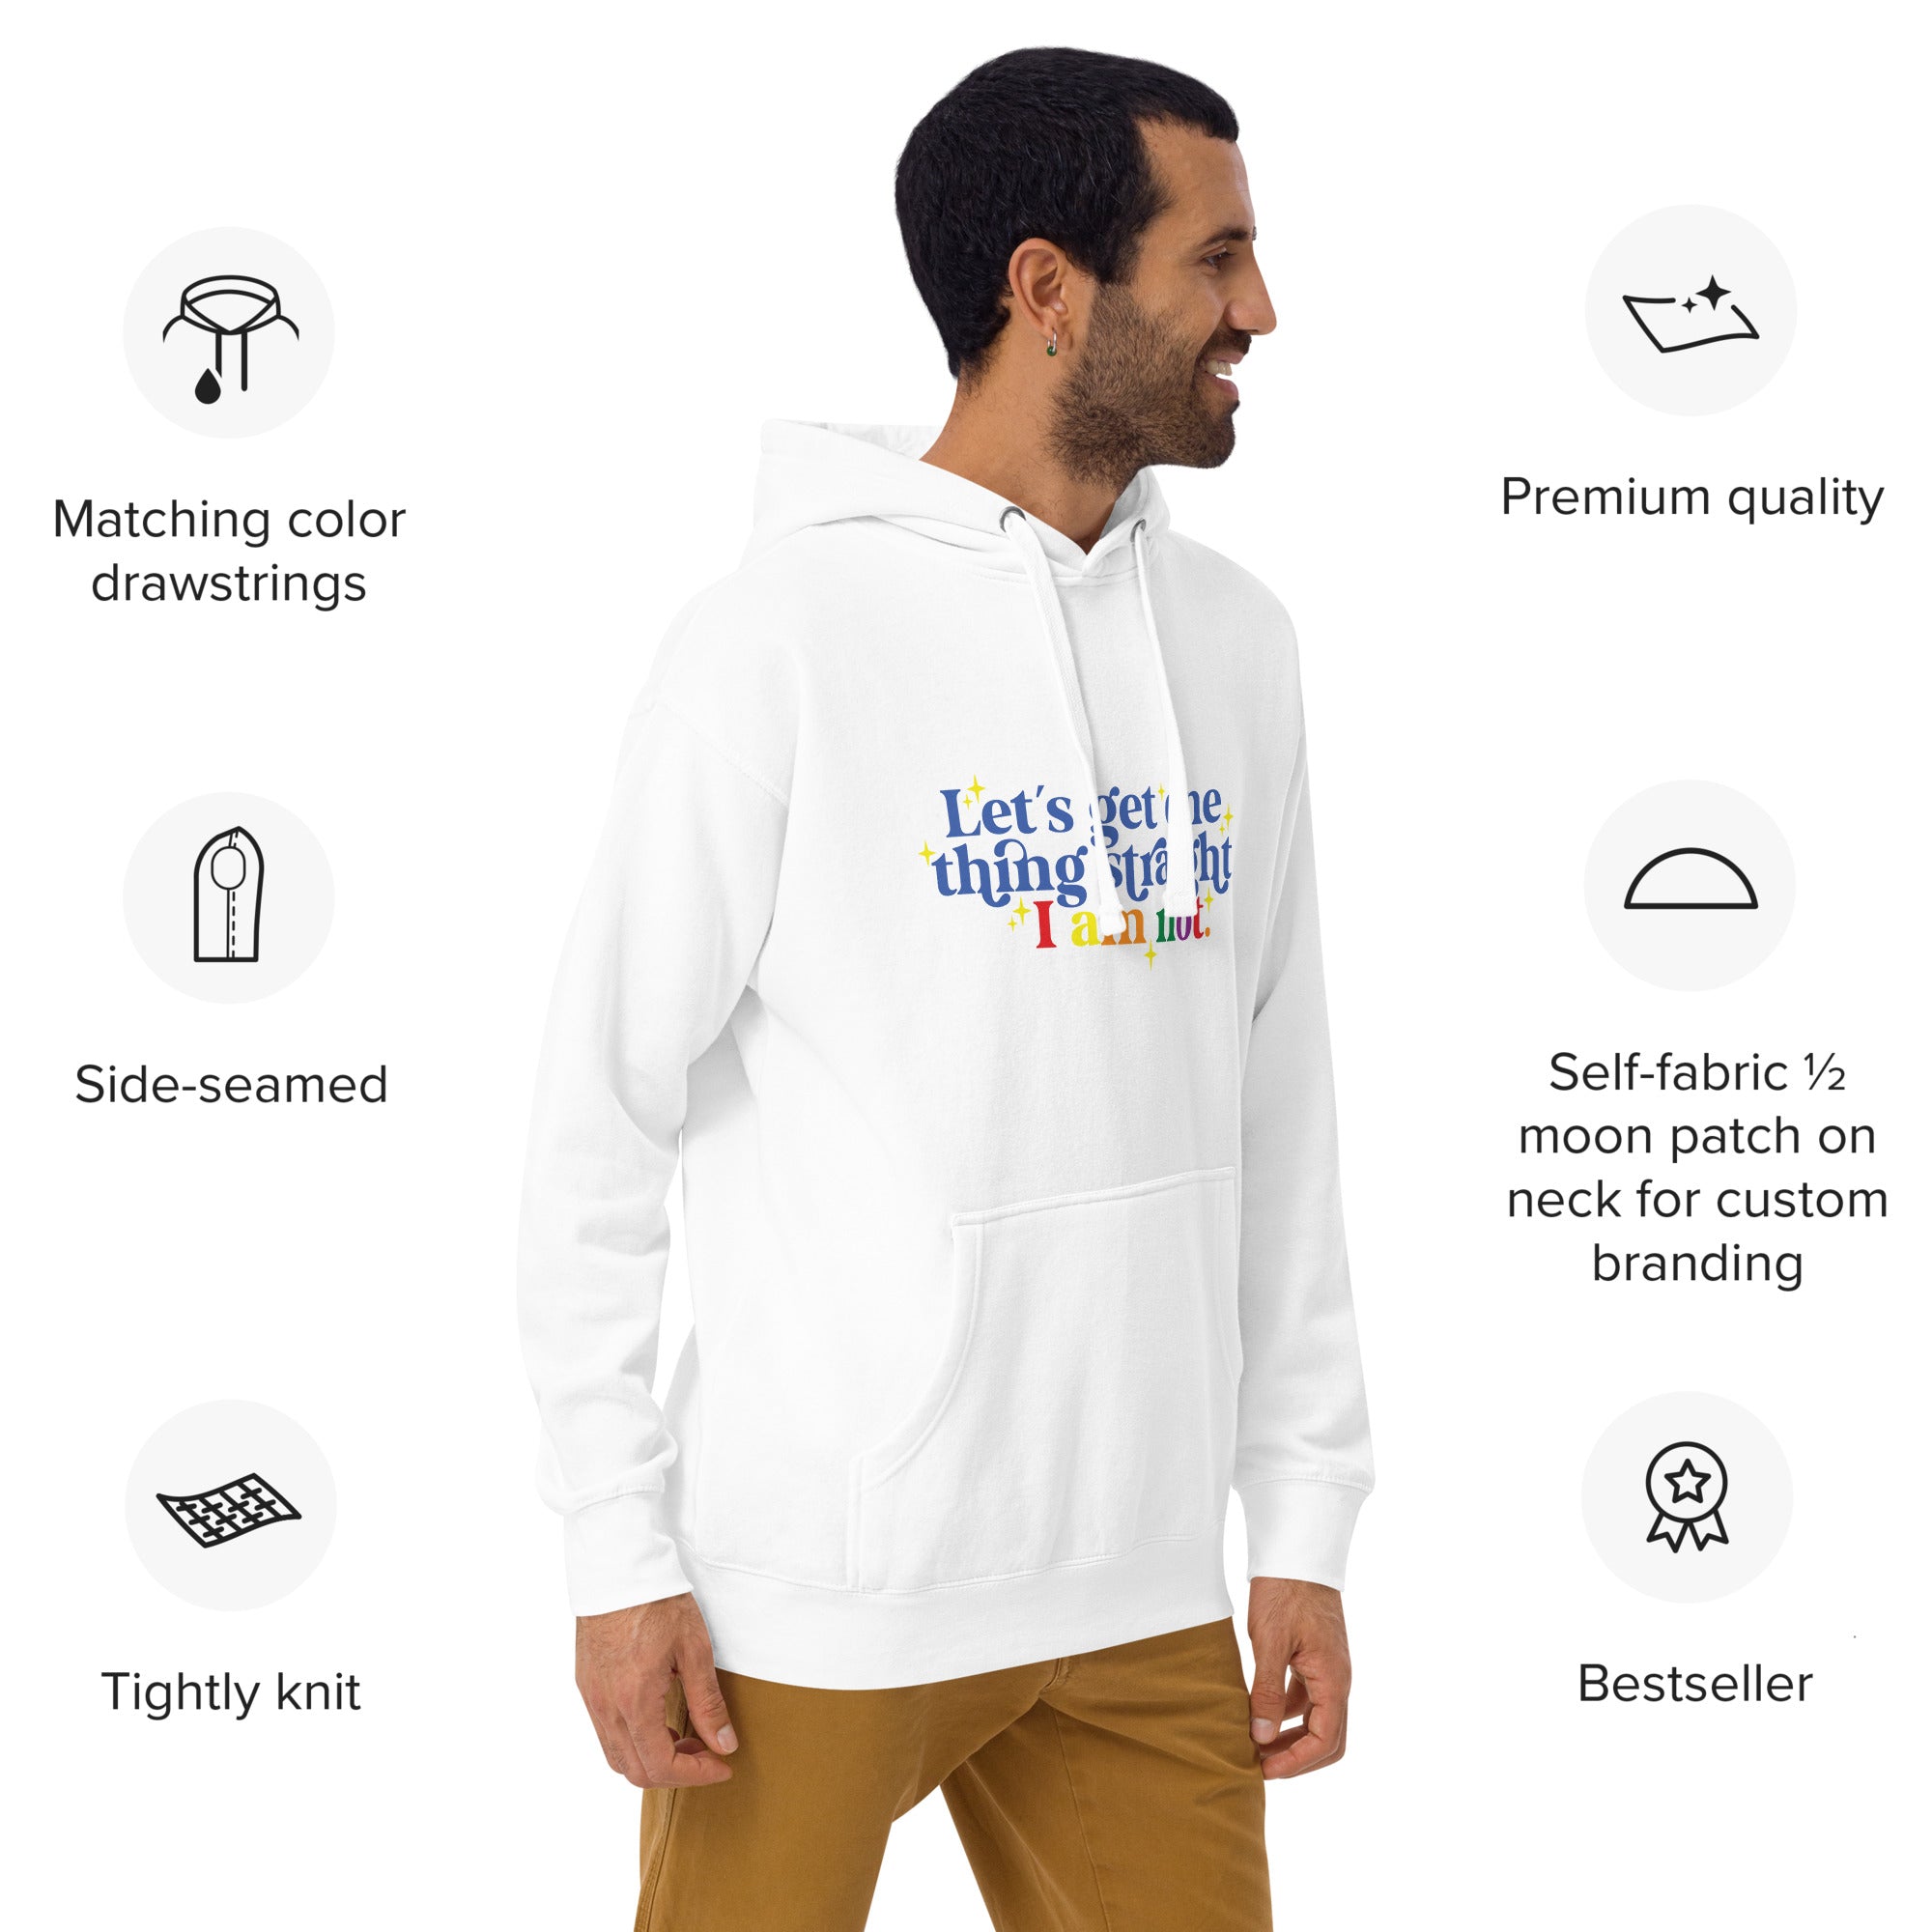 Unisex Hoodie- Let's get one thing straight I am not